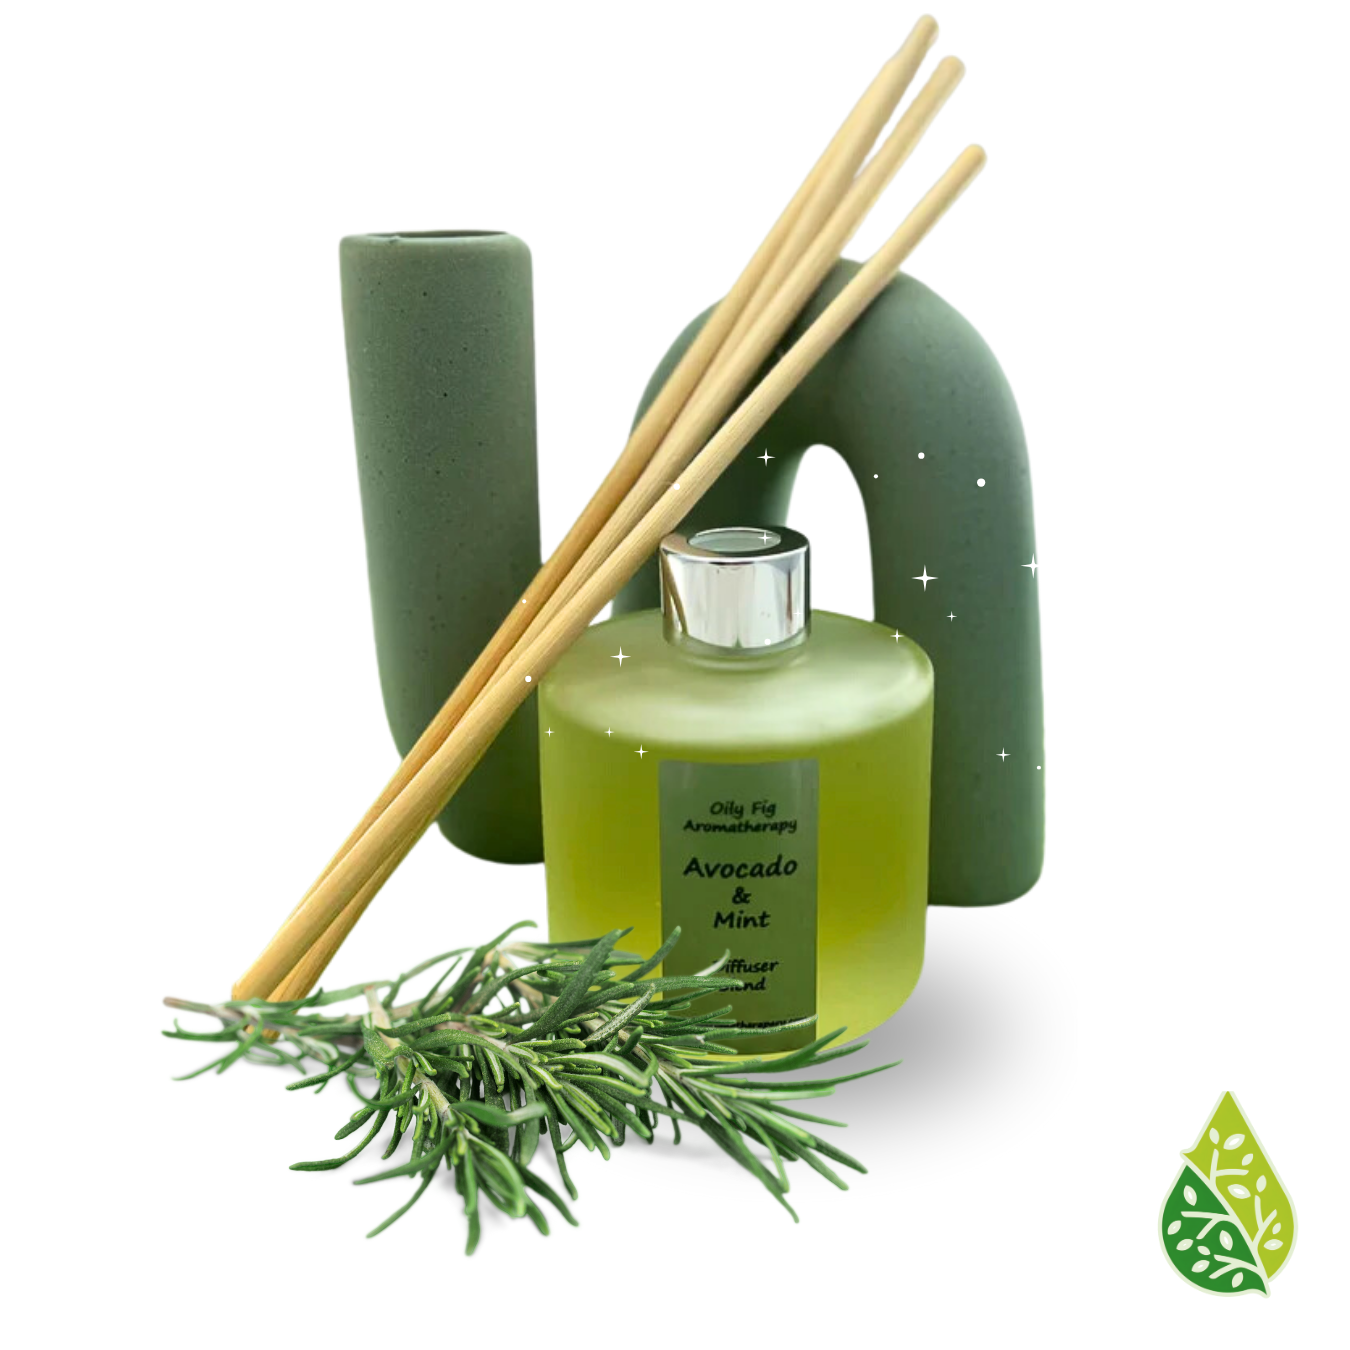 Avocado & Mint reed diffuser: a fresh and invigorating aroma to elevate your space